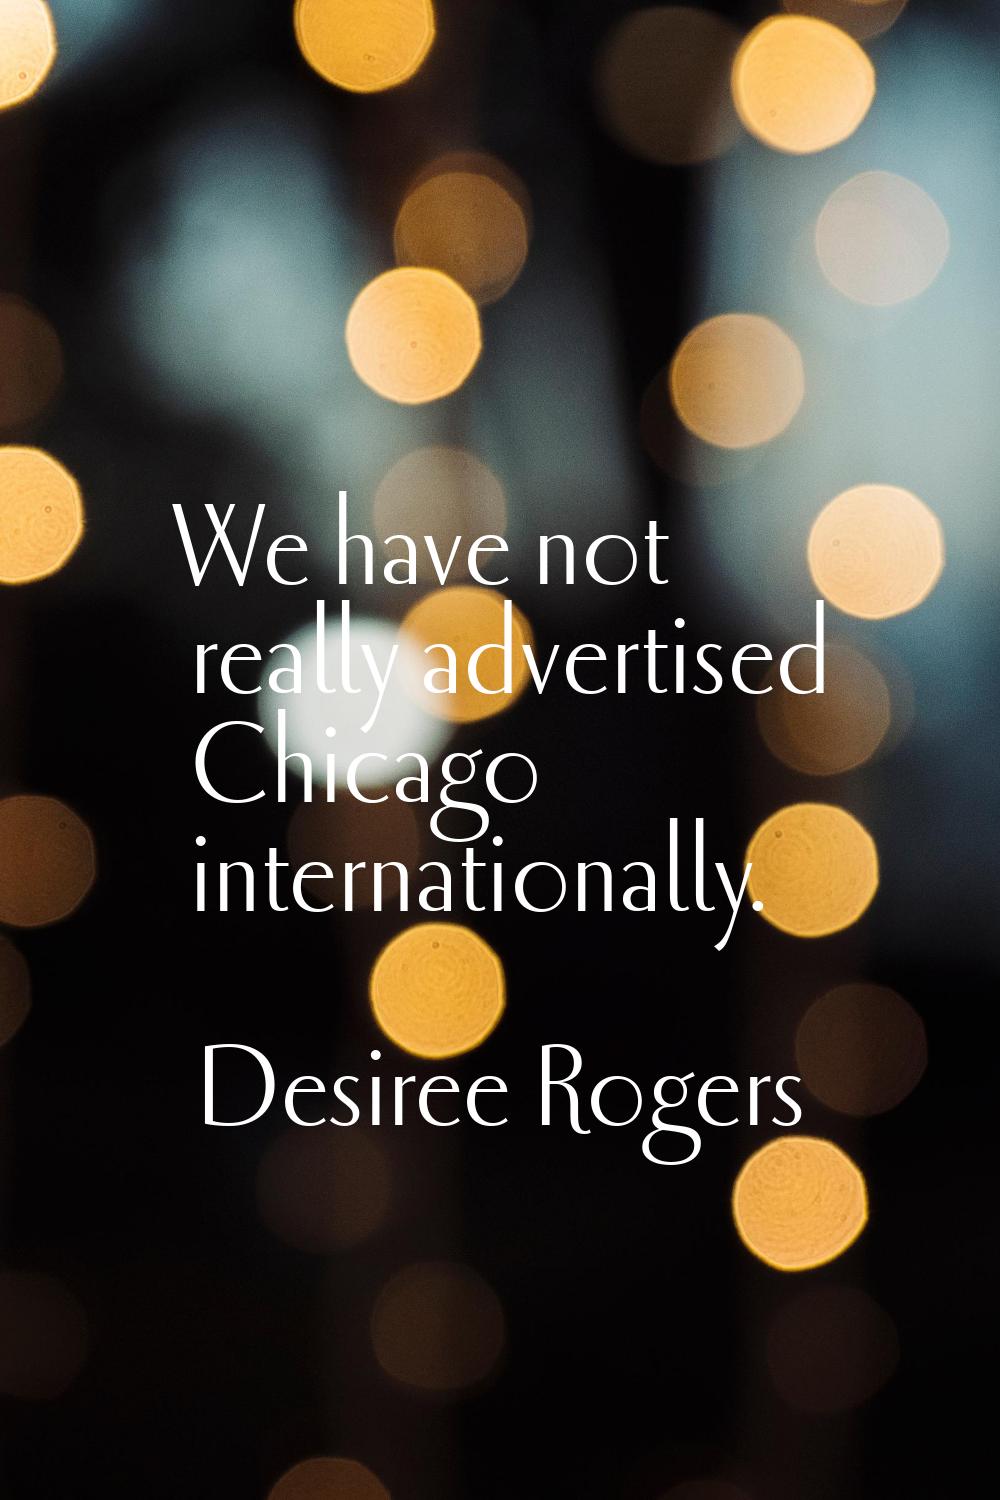 We have not really advertised Chicago internationally.